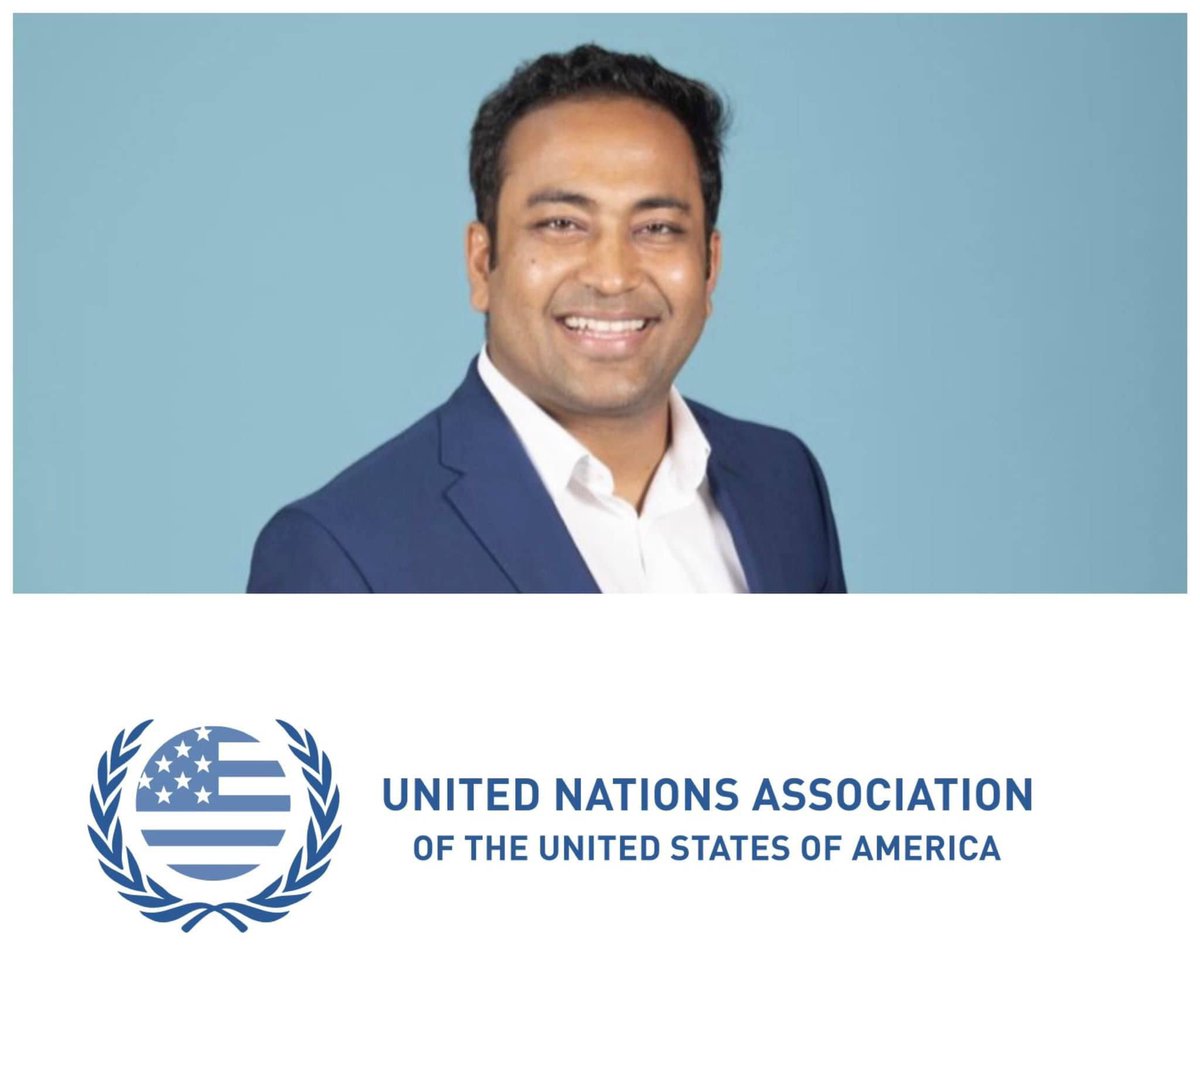 Very honored and humbled to announce I have been re-elected for my third term (2024-2026) on the National Council of @UNAUSA - a movement of 20,000+ Americans working to build a brighter future by helping the UN 🇺🇳 help the world 🇺🇸 #USAforUN | #langchat l #edchat @unfoundation